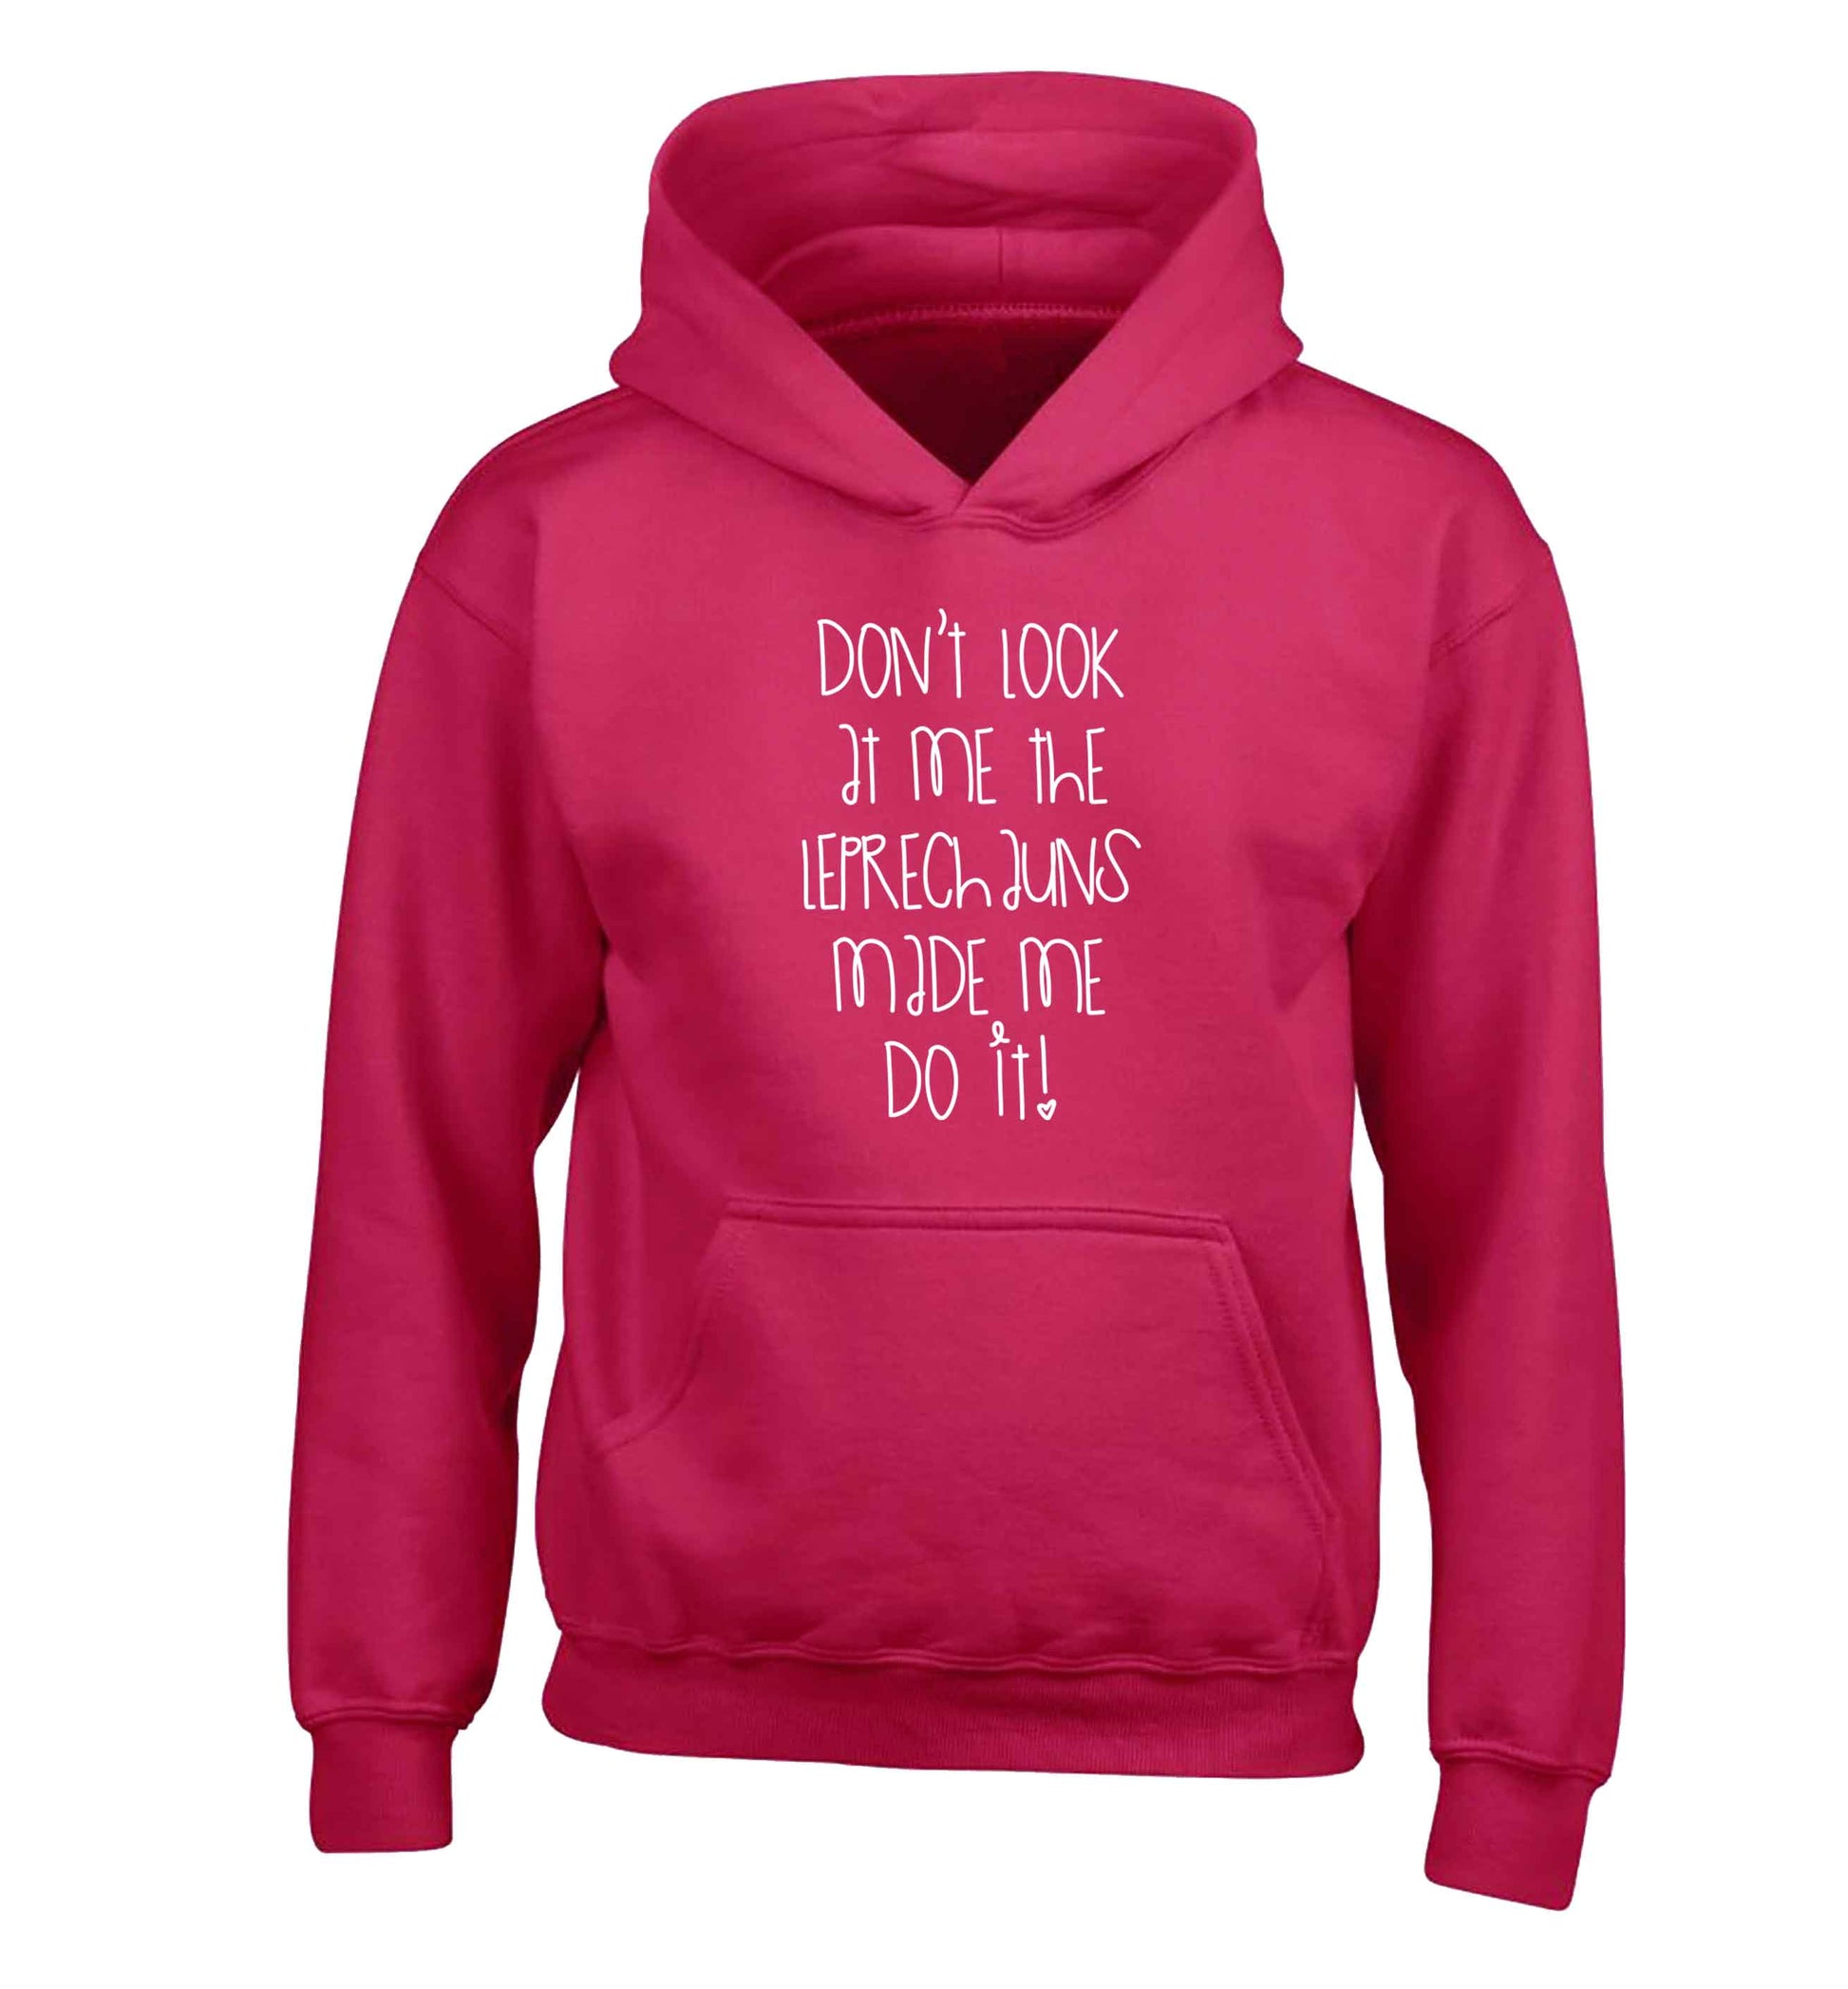 Don't look at me the leprechauns made me do it children's pink hoodie 12-13 Years